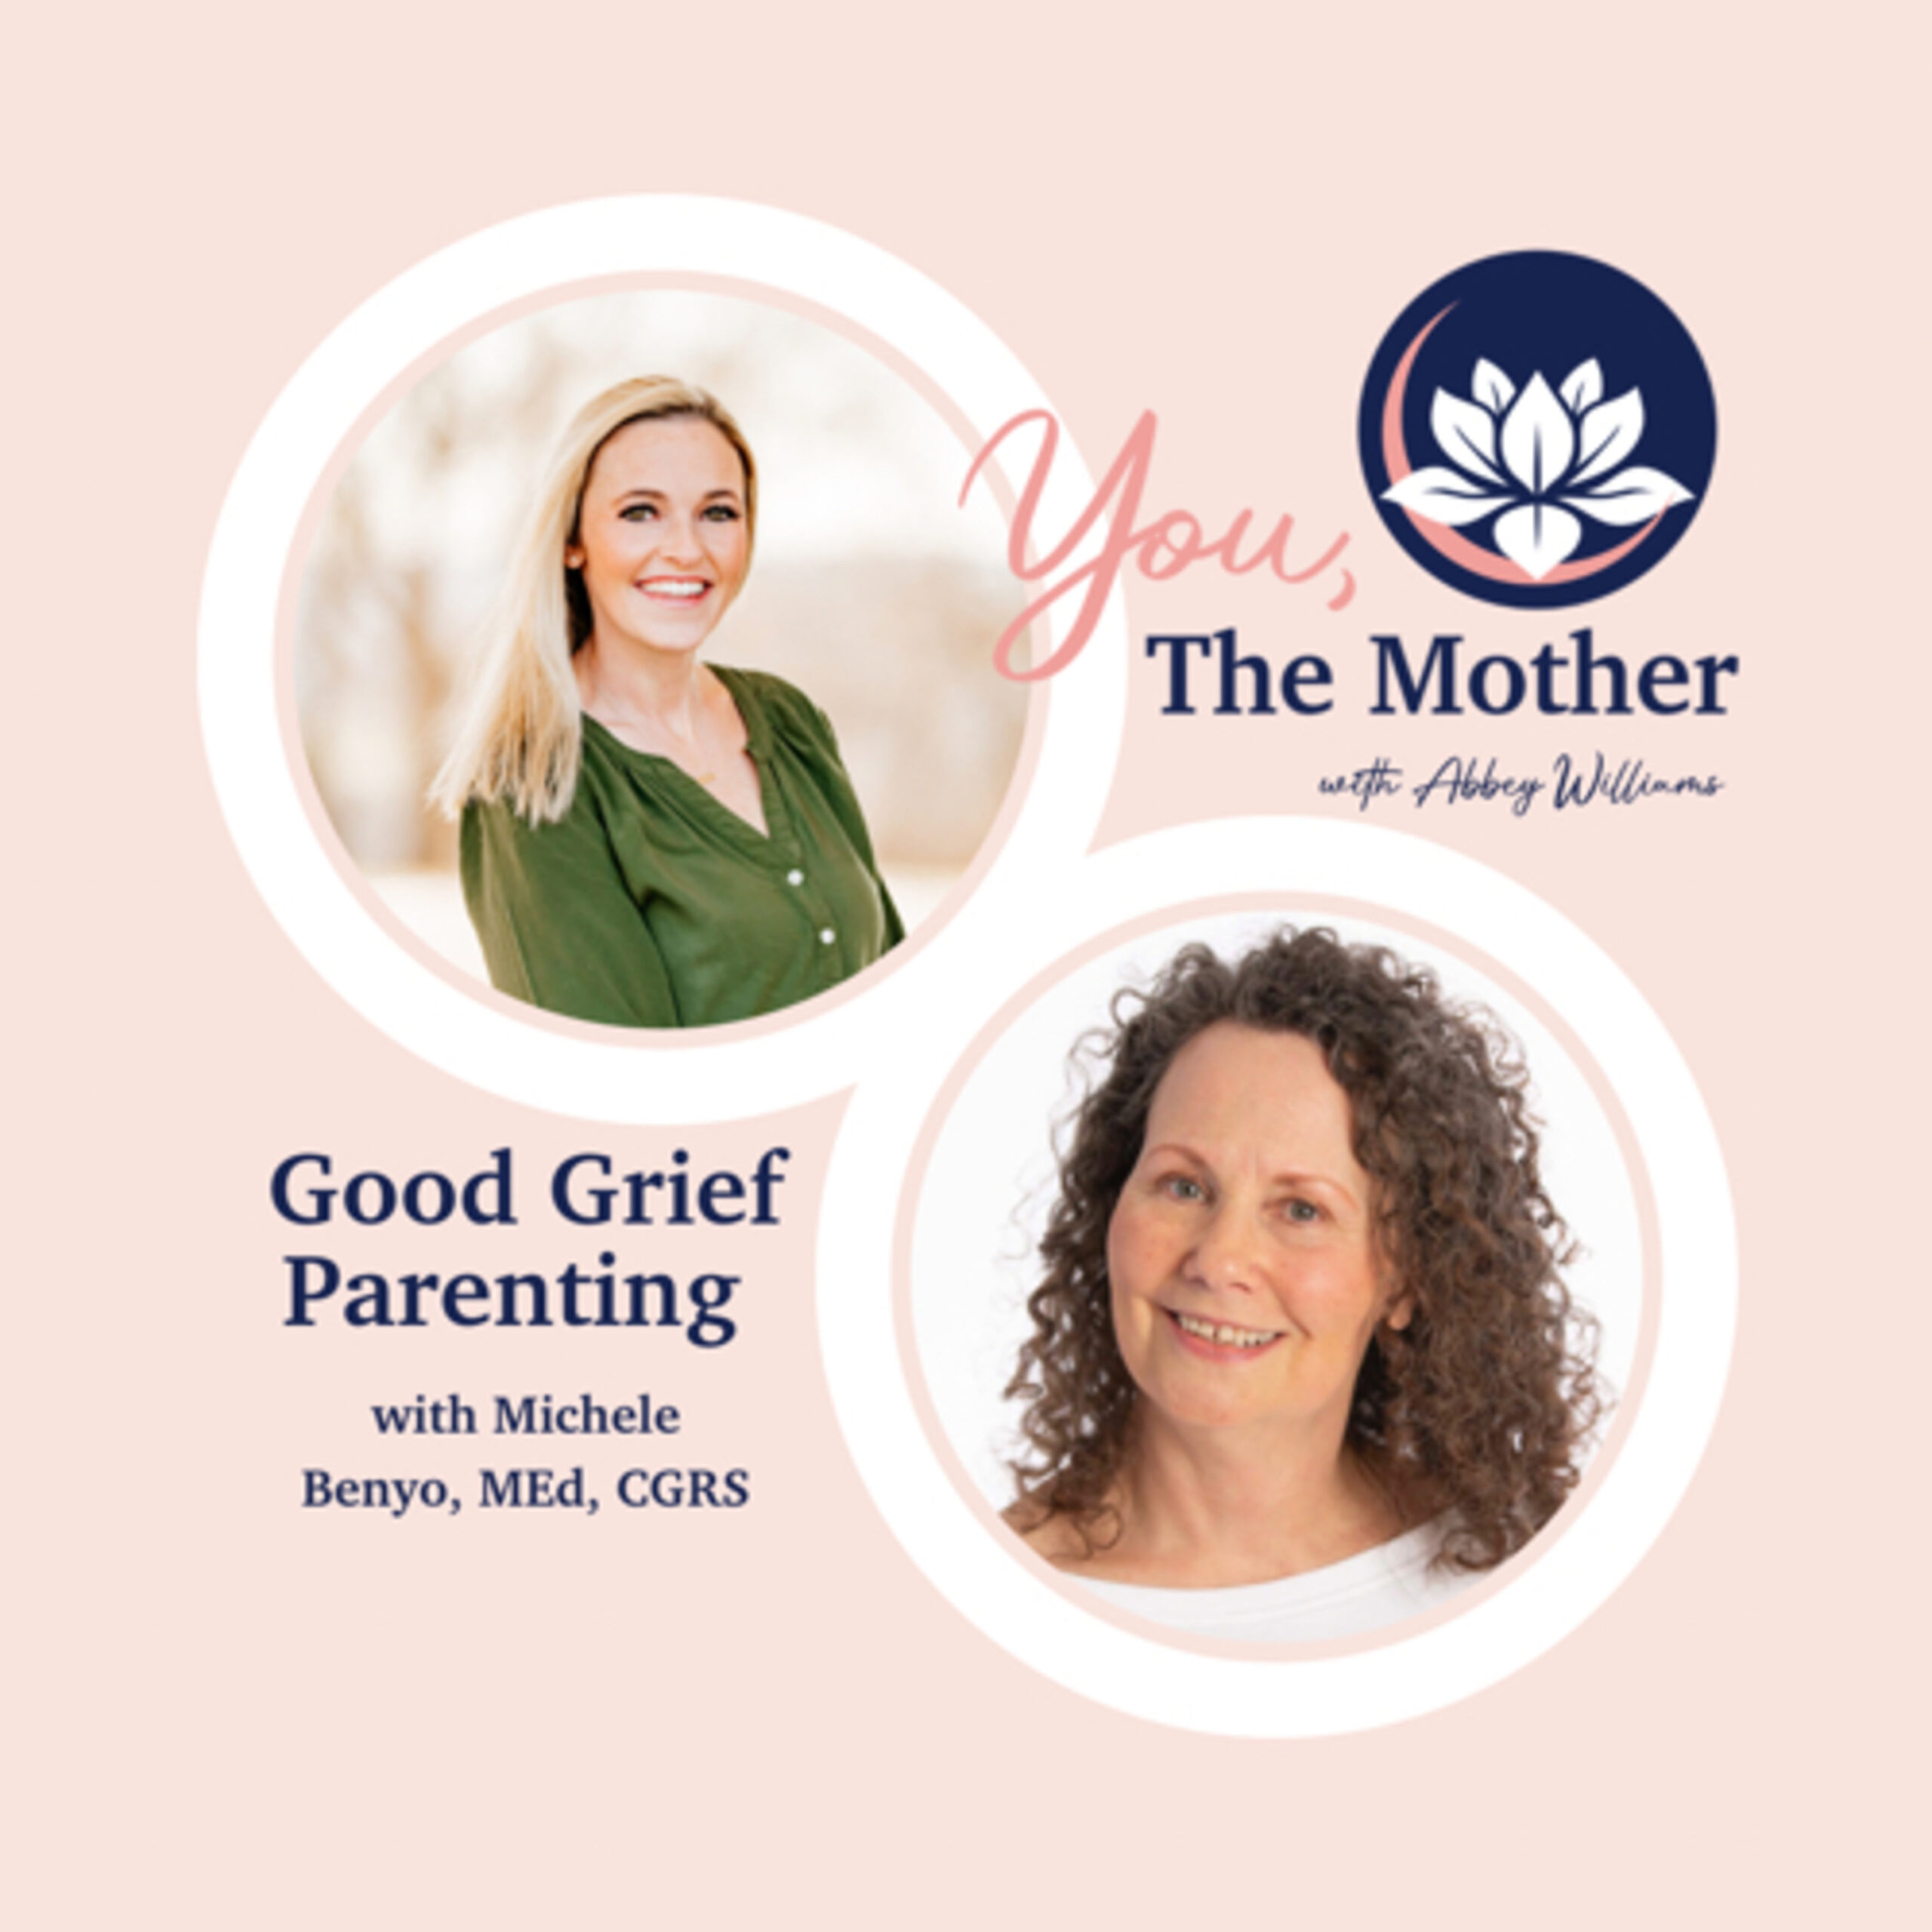 Good Grief Parenting with Michele Benyo